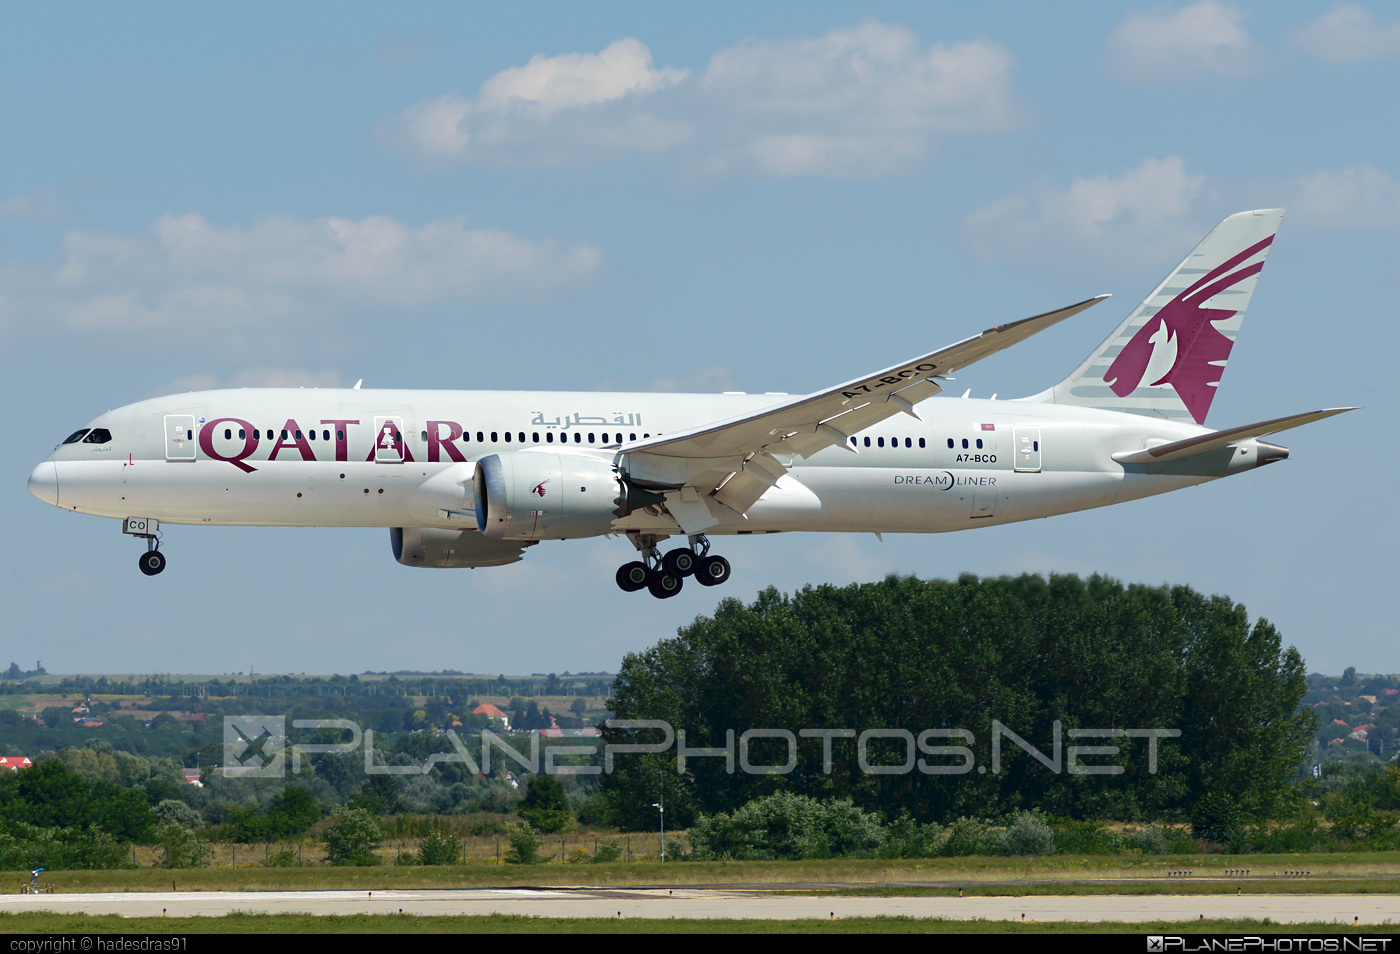 Boeing 787-8 Dreamliner - A7-BCO operated by Qatar Airways #b787 #boeing #boeing787 #dreamliner #qatarairways